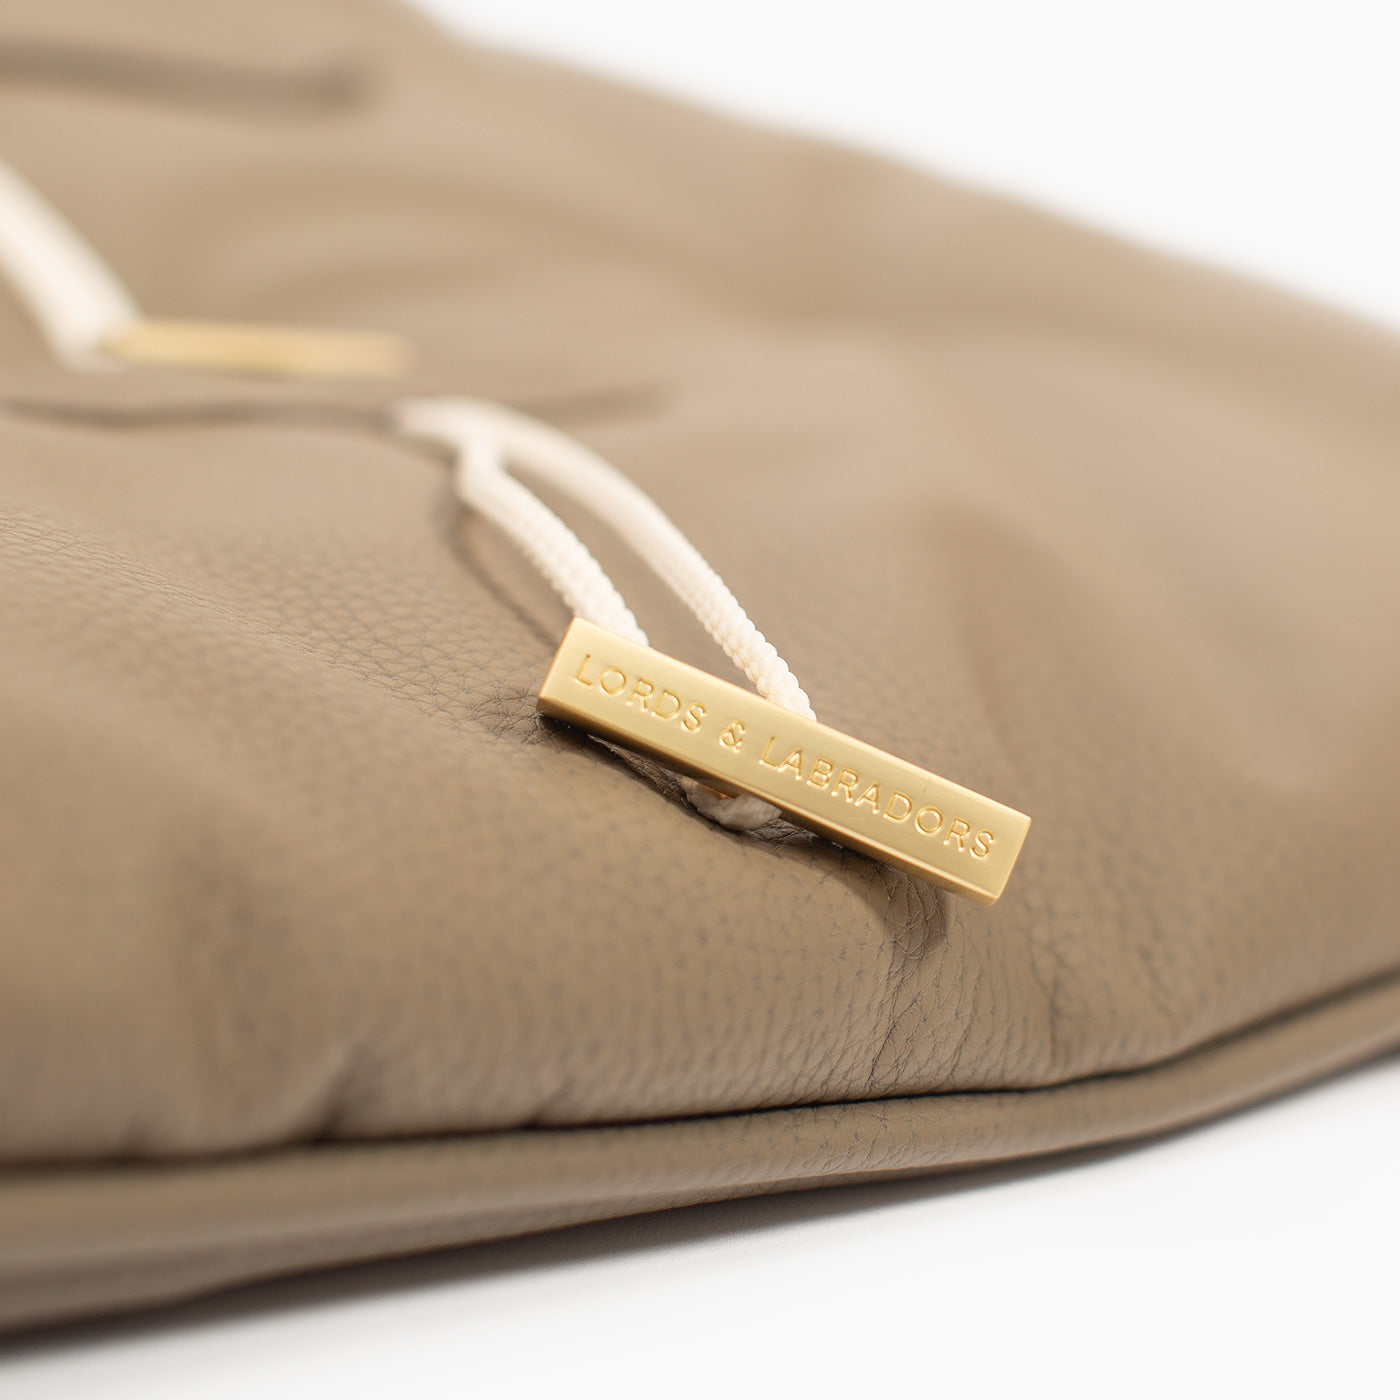 Lords & Labradors Travel Mat in Camel Rhino Faux Leather